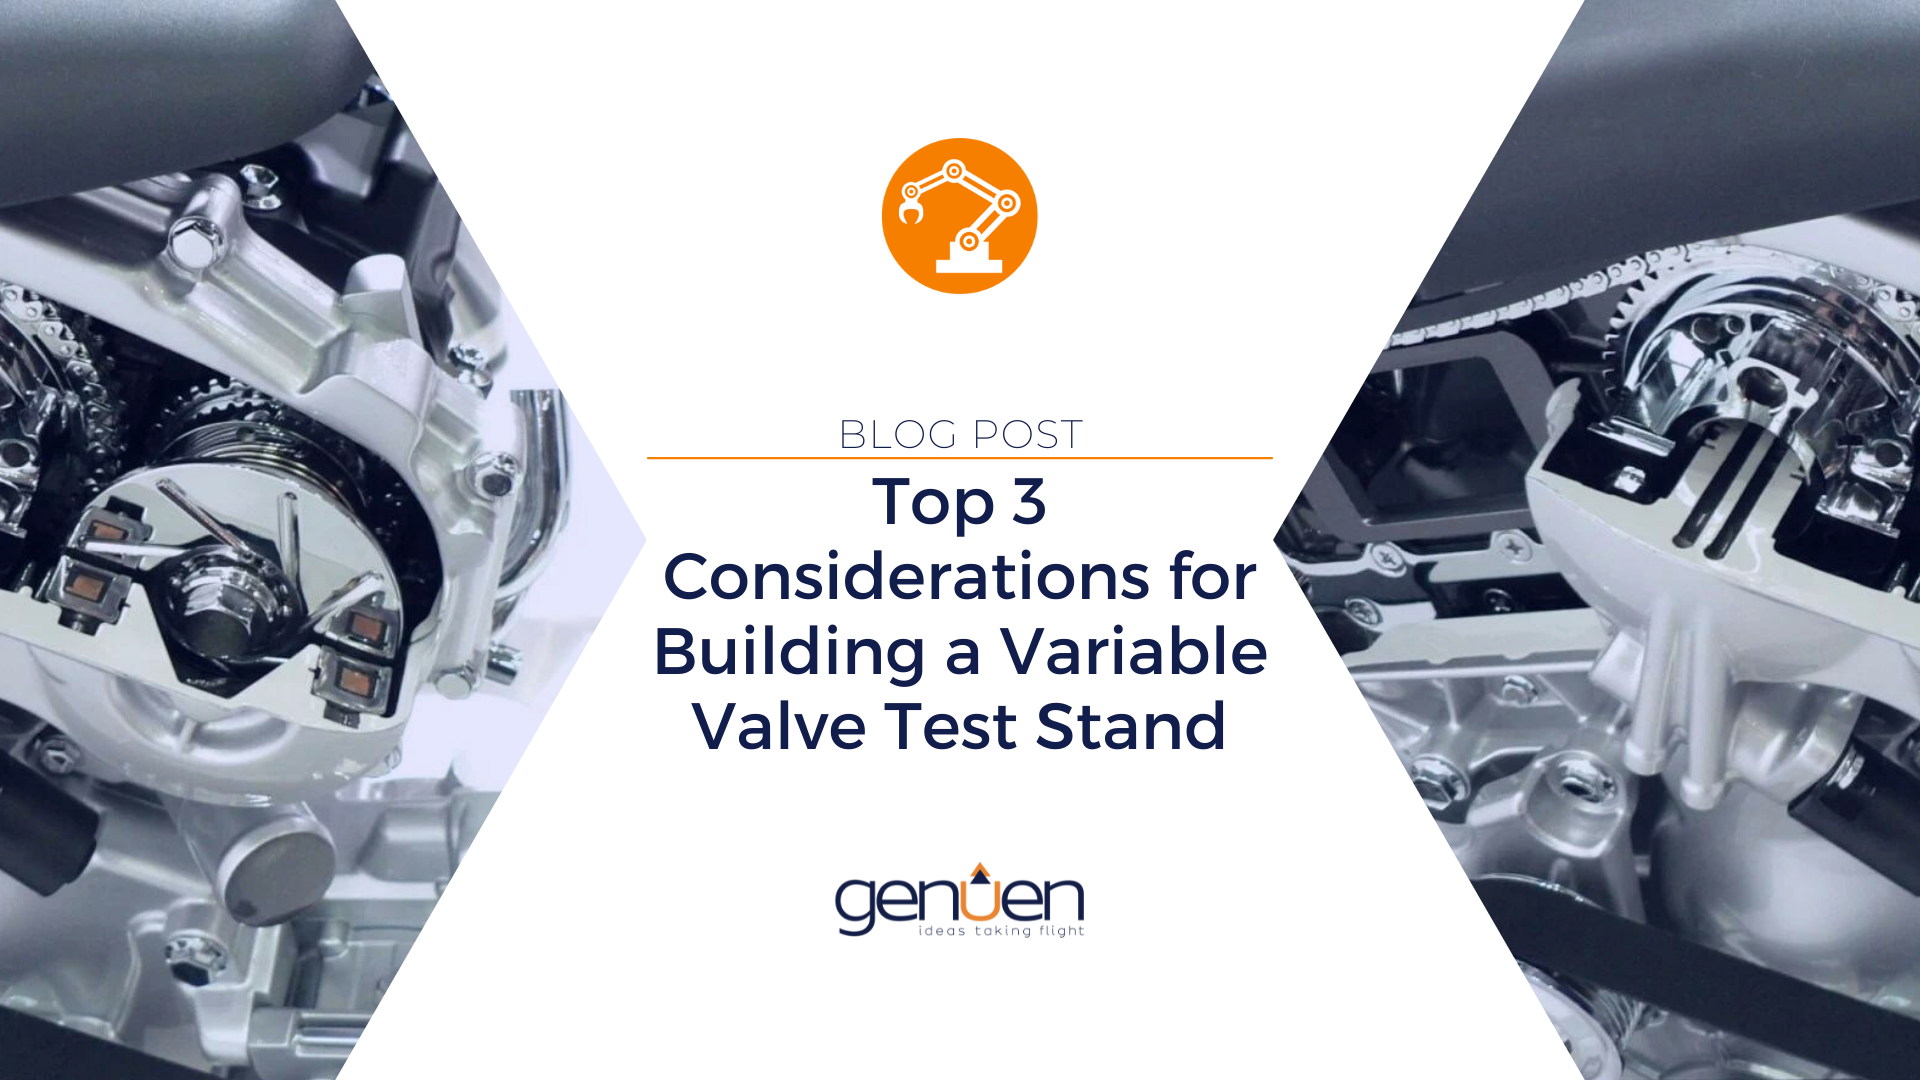 Top 3 Considerations for Building a Variable Valve Test Stand